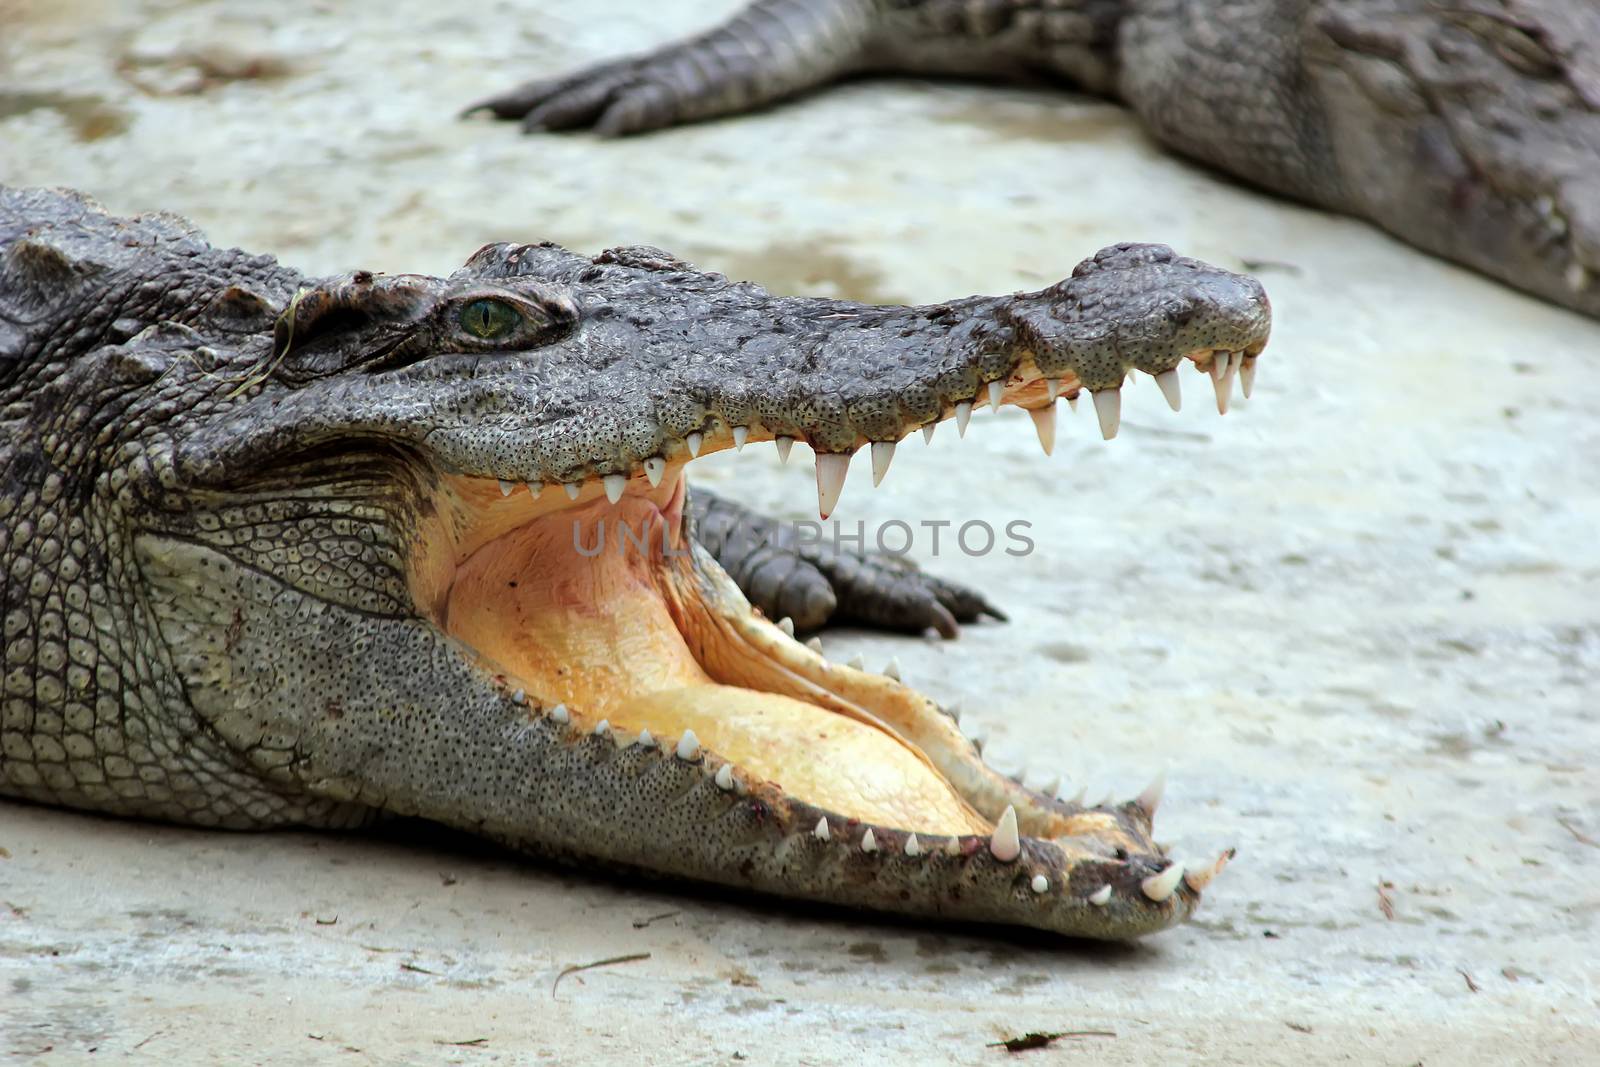 The head of a crocodile with its mouth wide open, blood on its teeth by 977_ReX_977